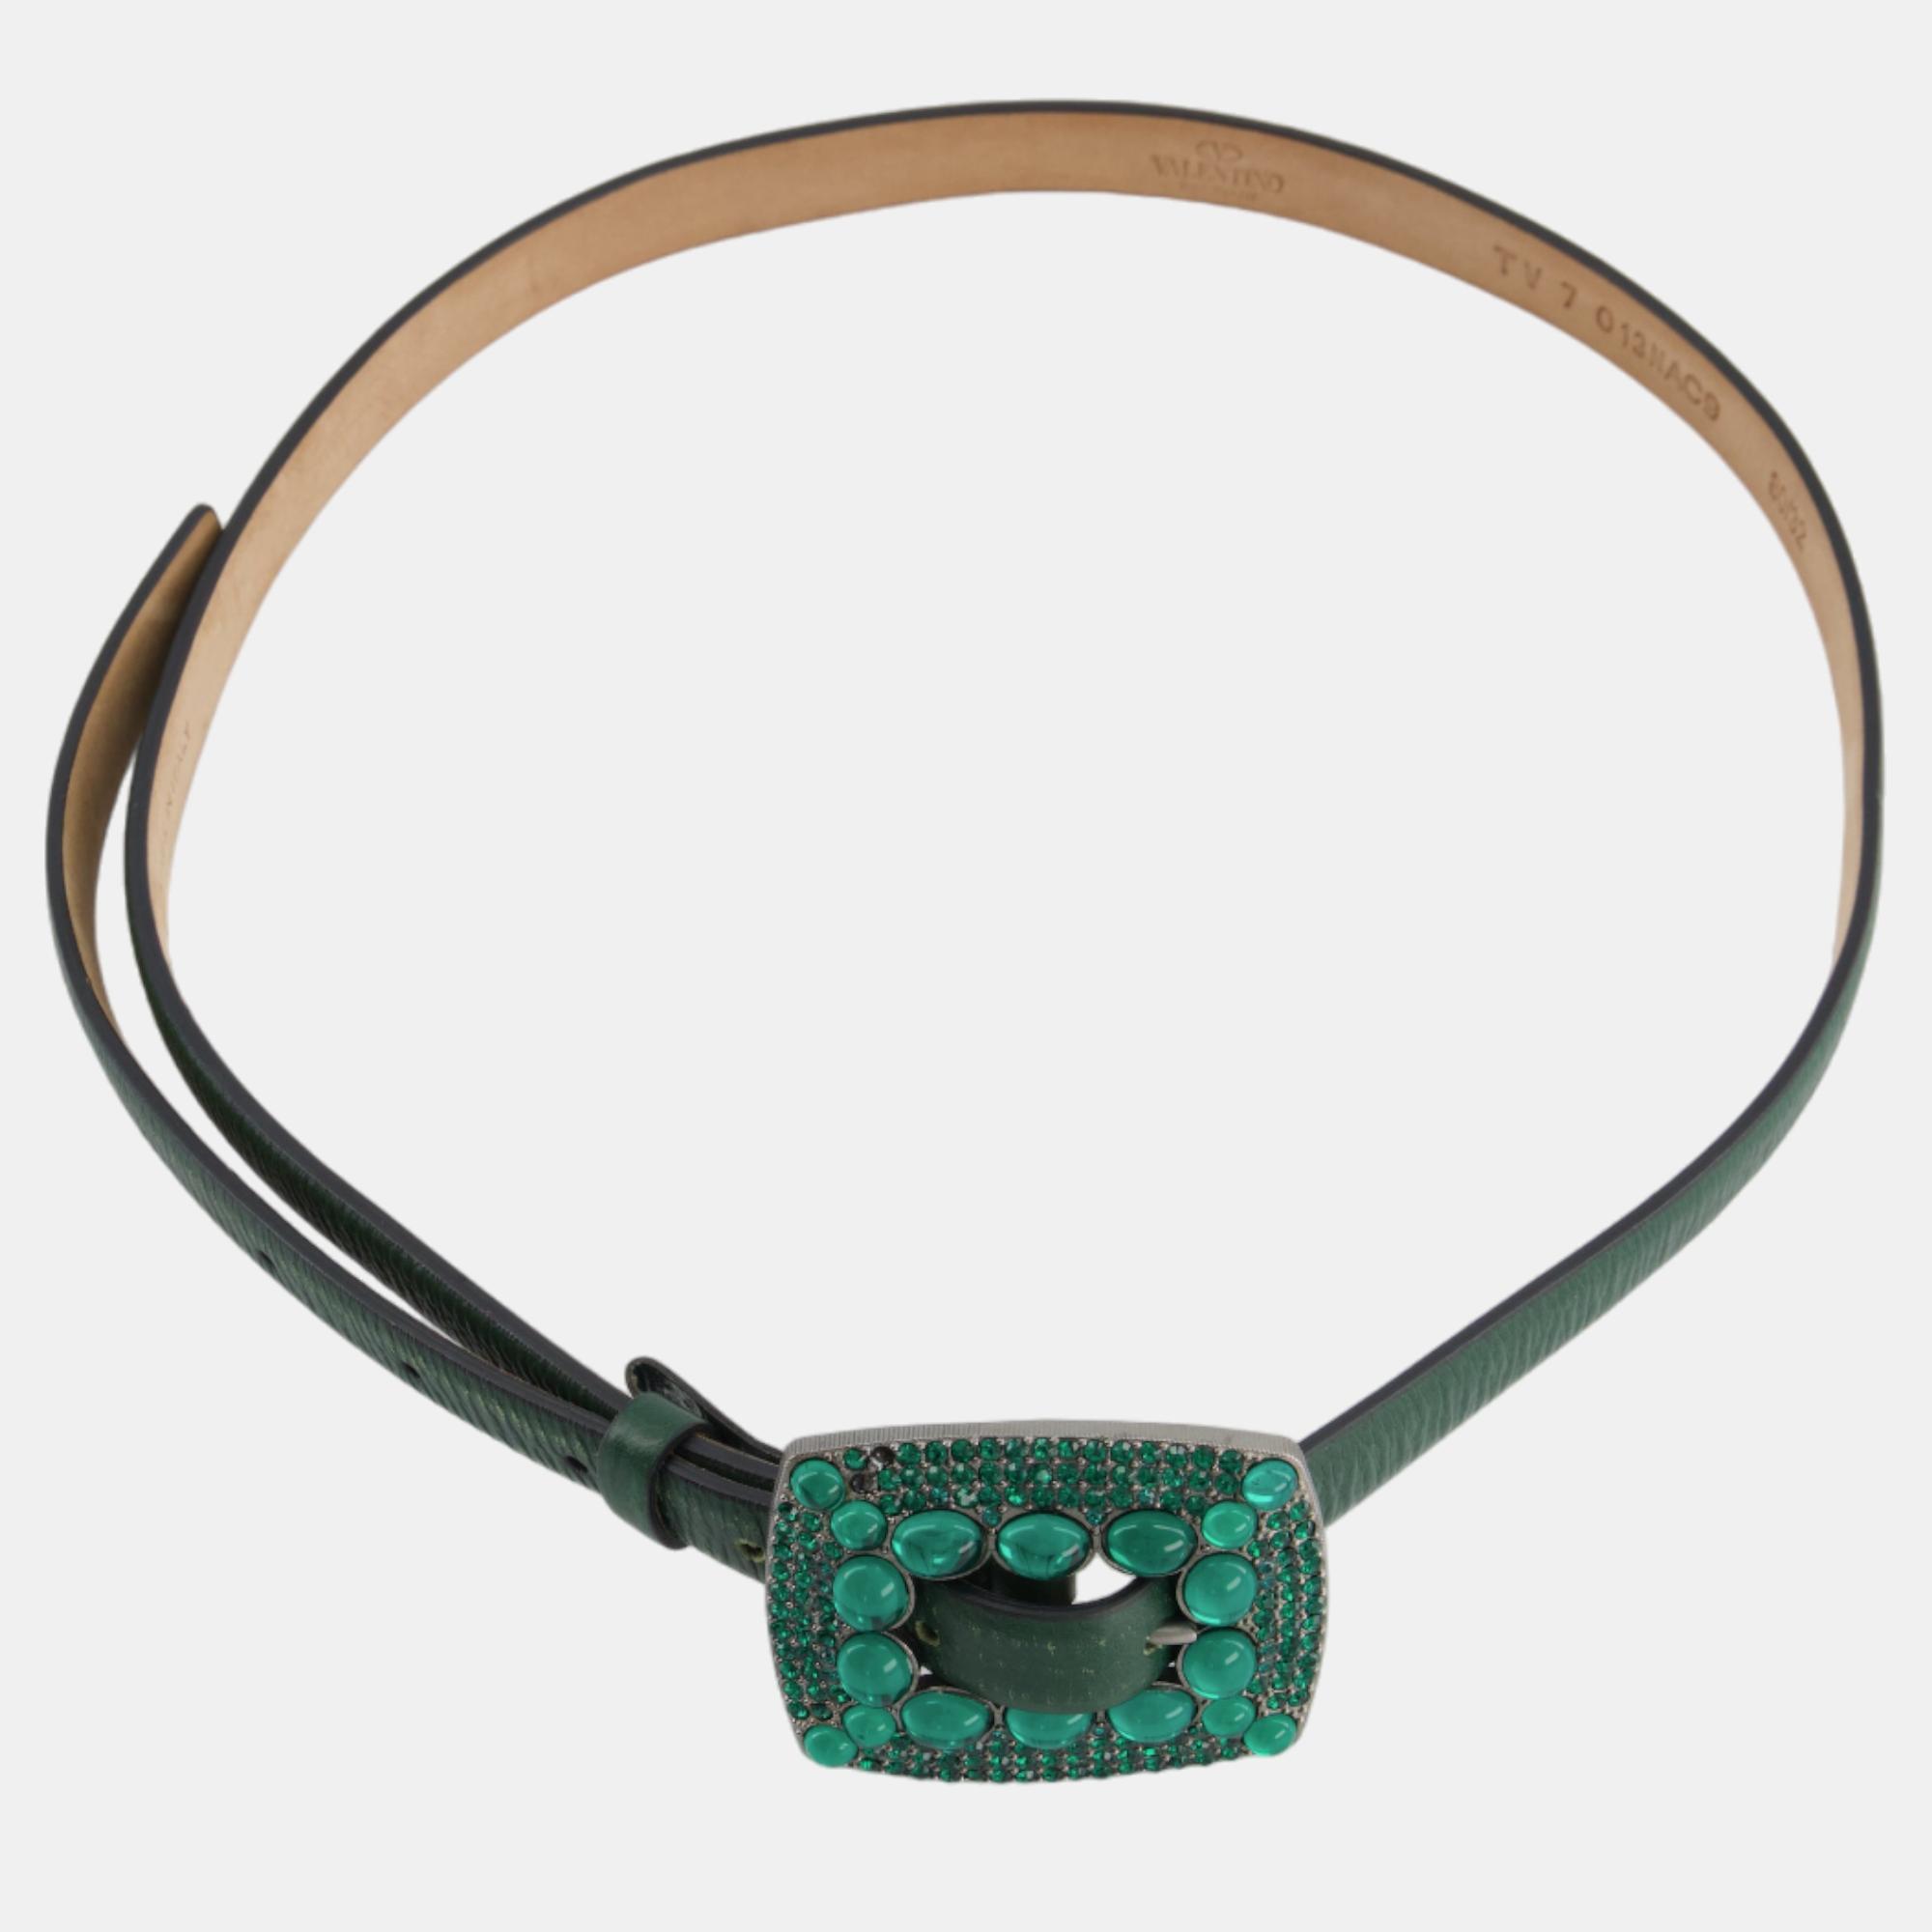 Valentino Green Leather Belt With Crystal Detail Size 80cm